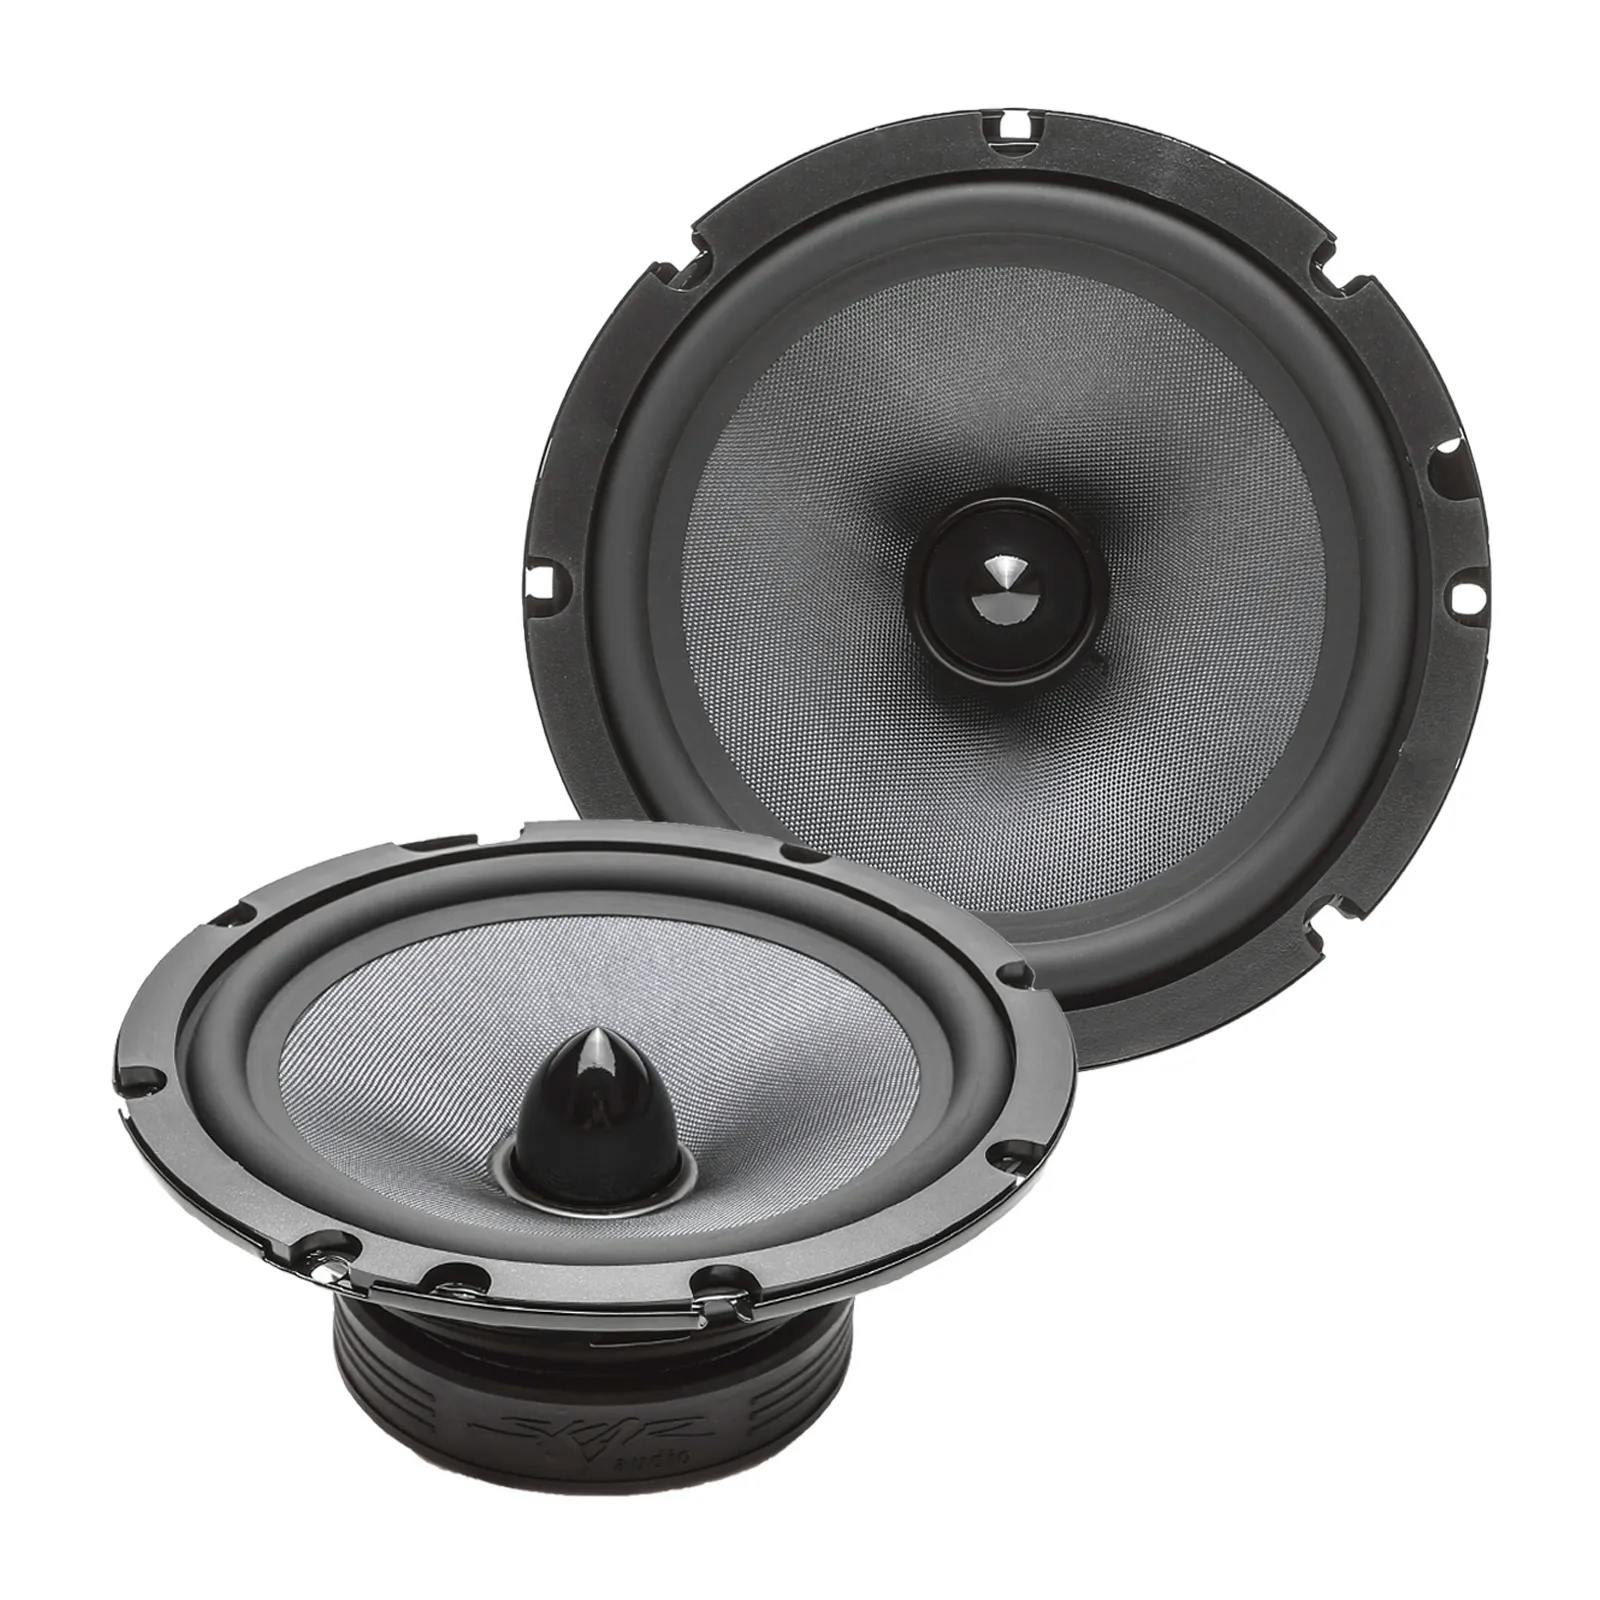 Featured Product Photo 1 for TX65C | 6.5" 200 Watt 2-Way Elite Component Speaker System